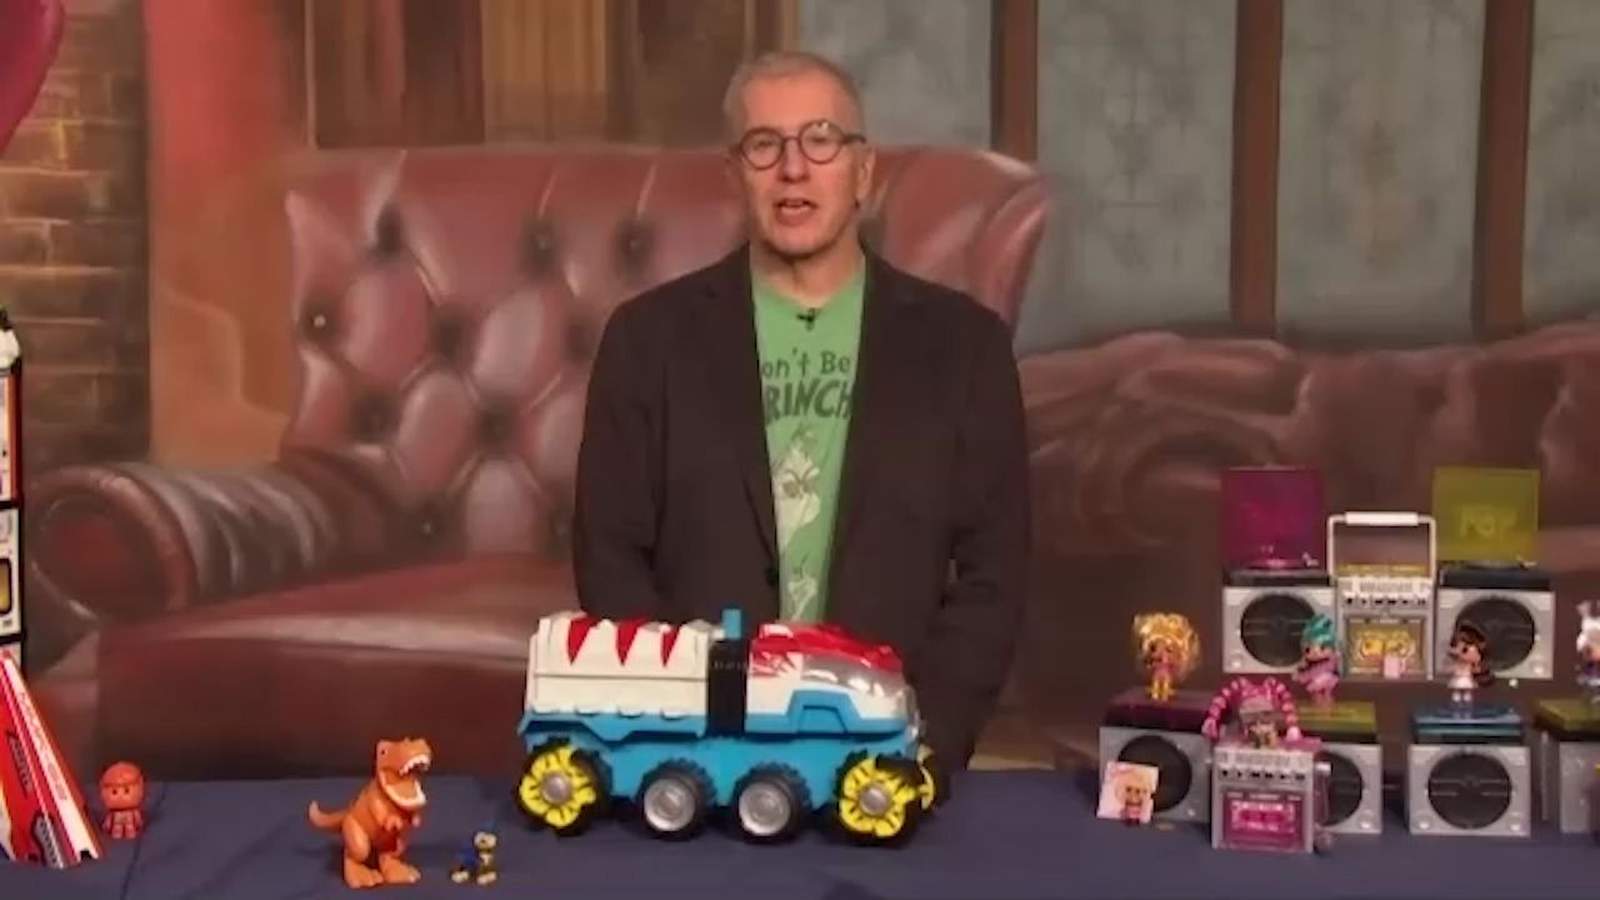 Looking for screen-free toys? The Toy Guy has some tips